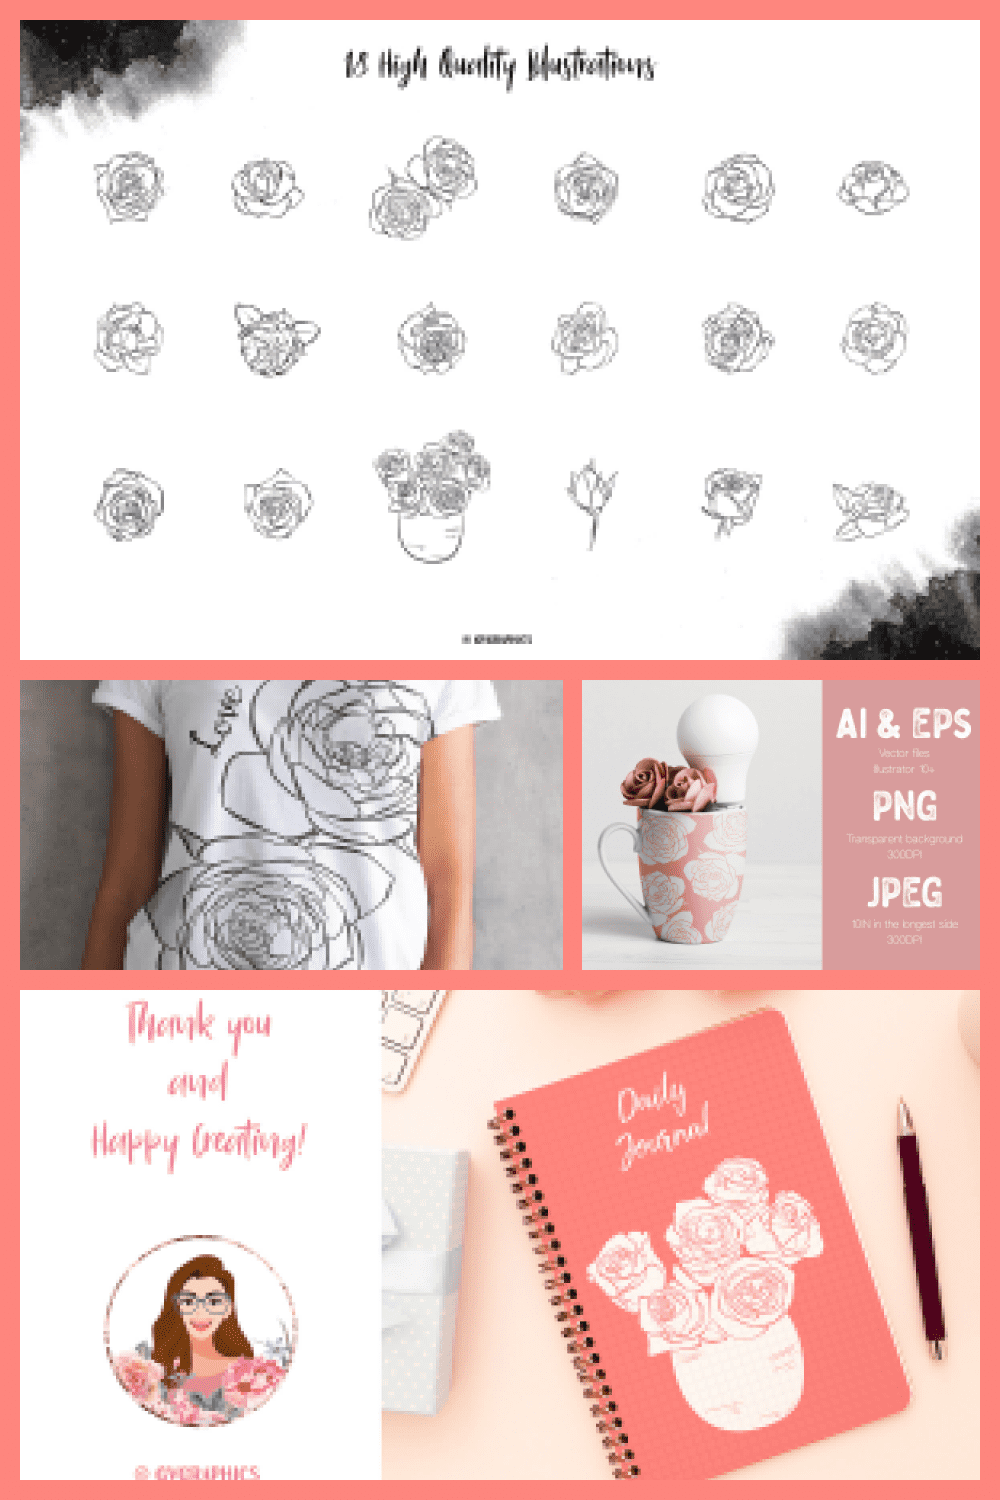 Hand Drawn Roses, Floral Illustrations in Black and White - MasterBundles - Pinterest Collage Image.